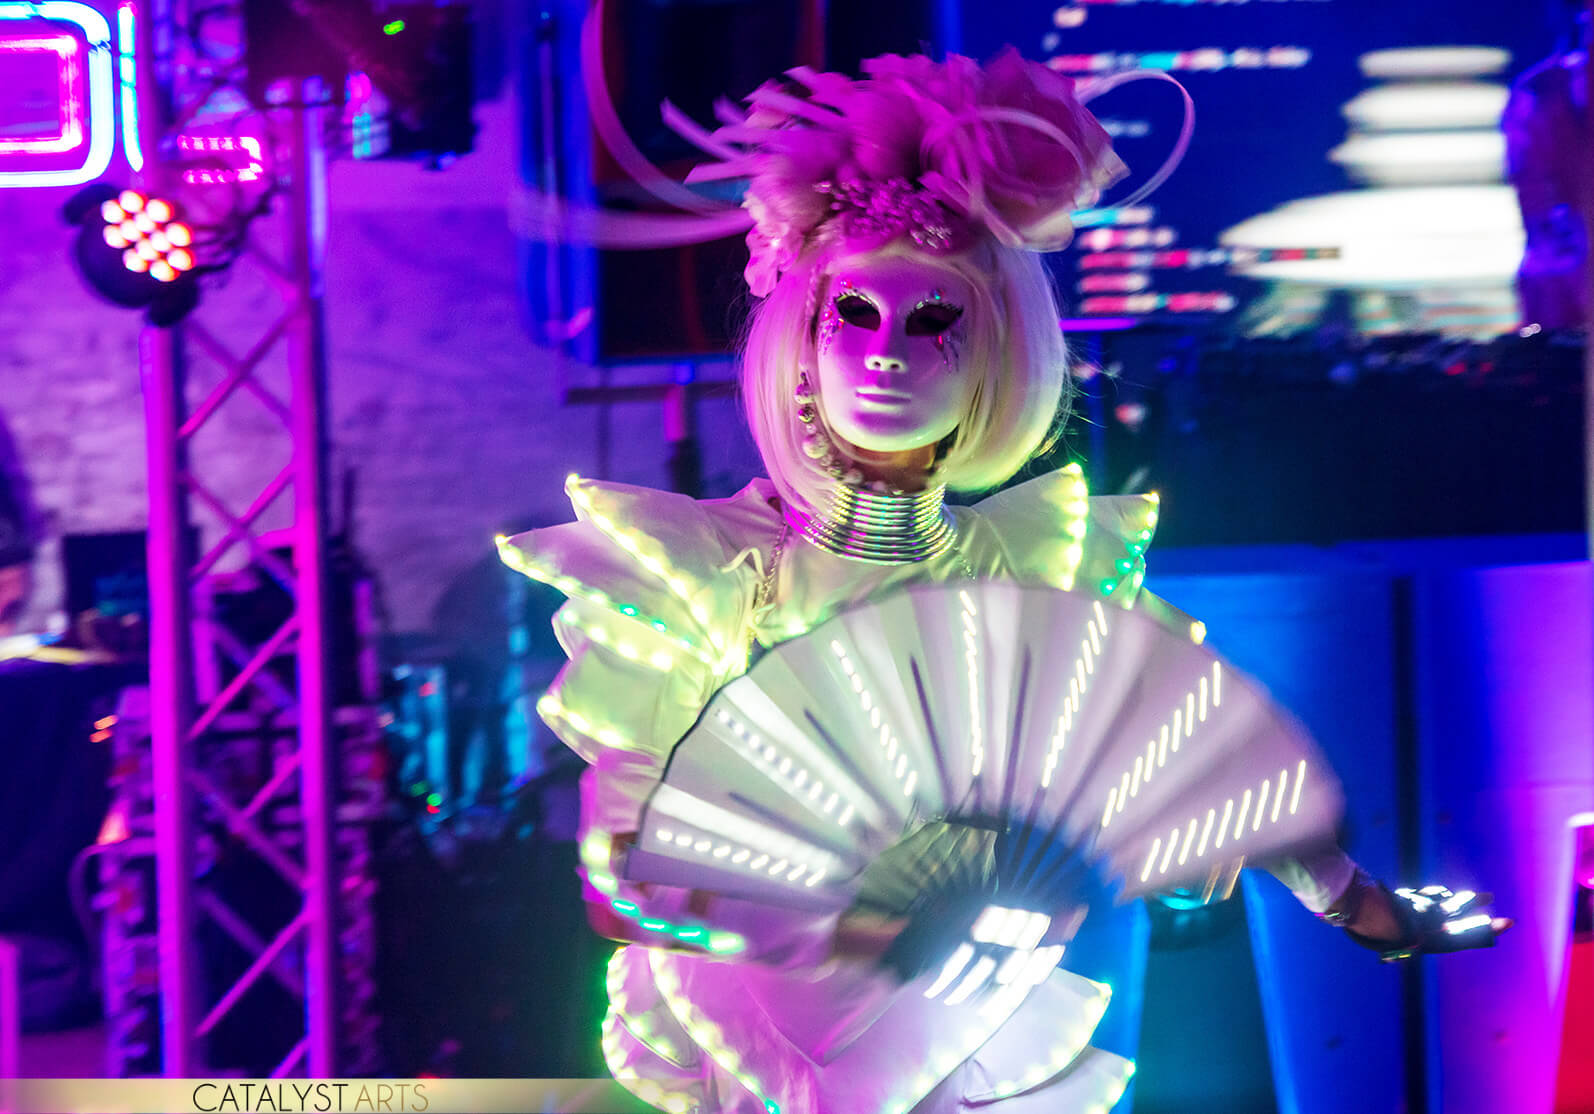 Futuristic Dancer wearing a white mark while holding a fan